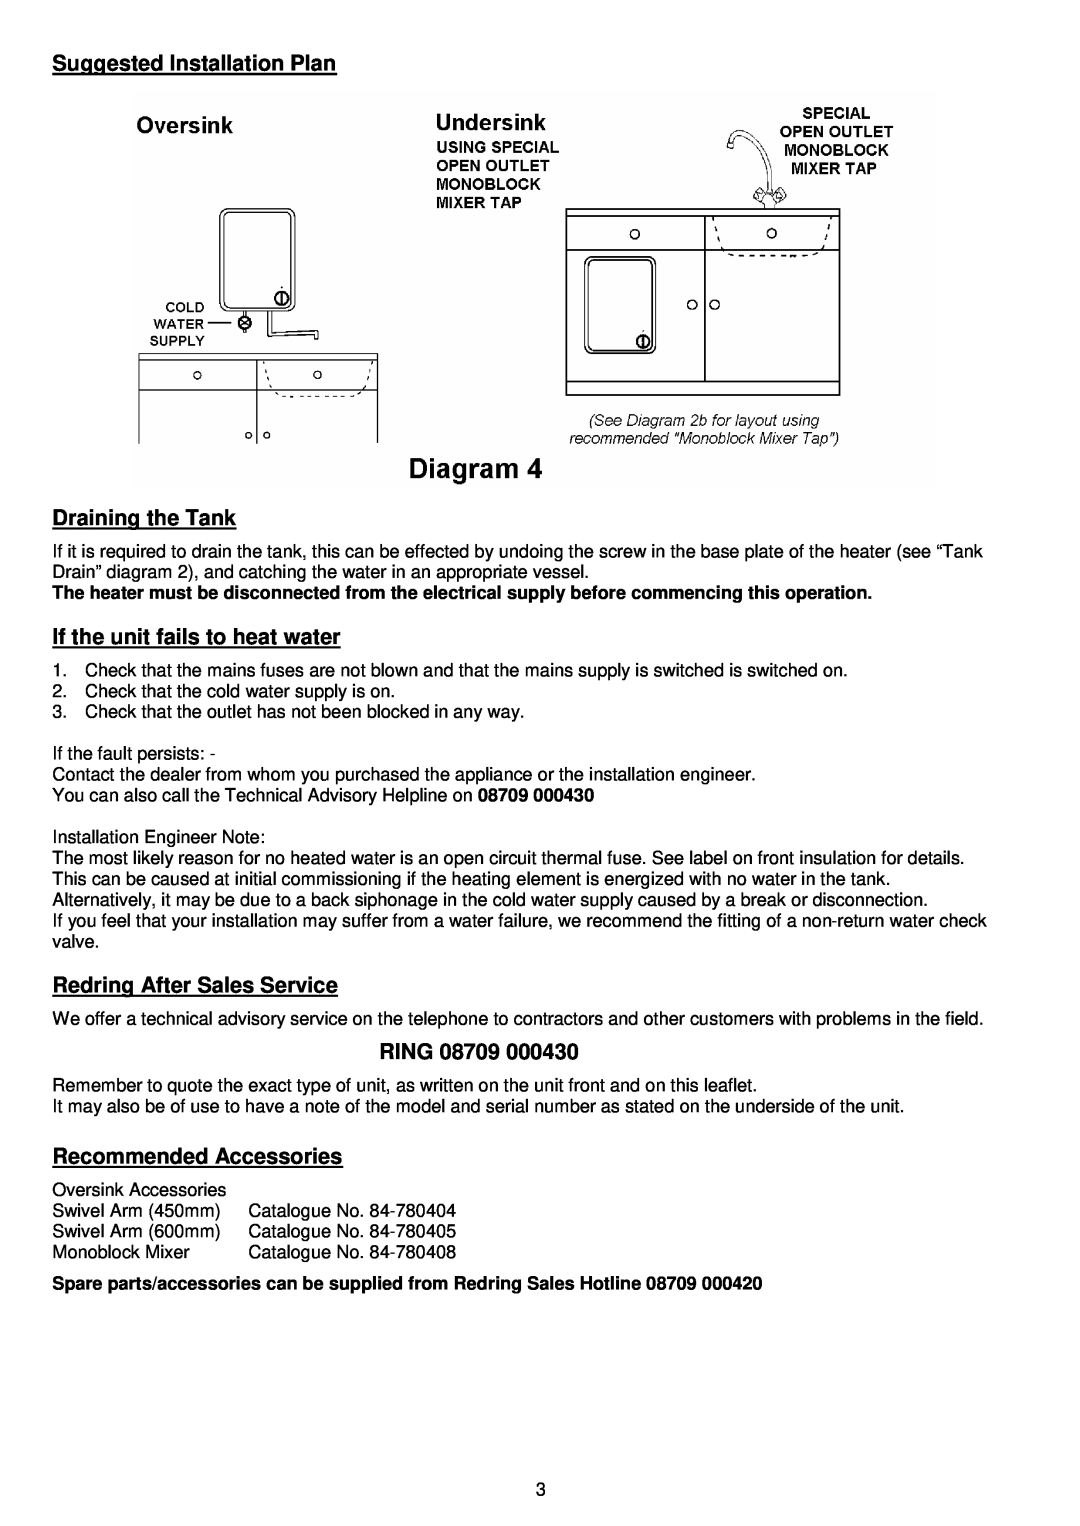 Redring WS7 Suggested Installation Plan Draining the Tank, If the unit fails to heat water, Redring After Sales Service 